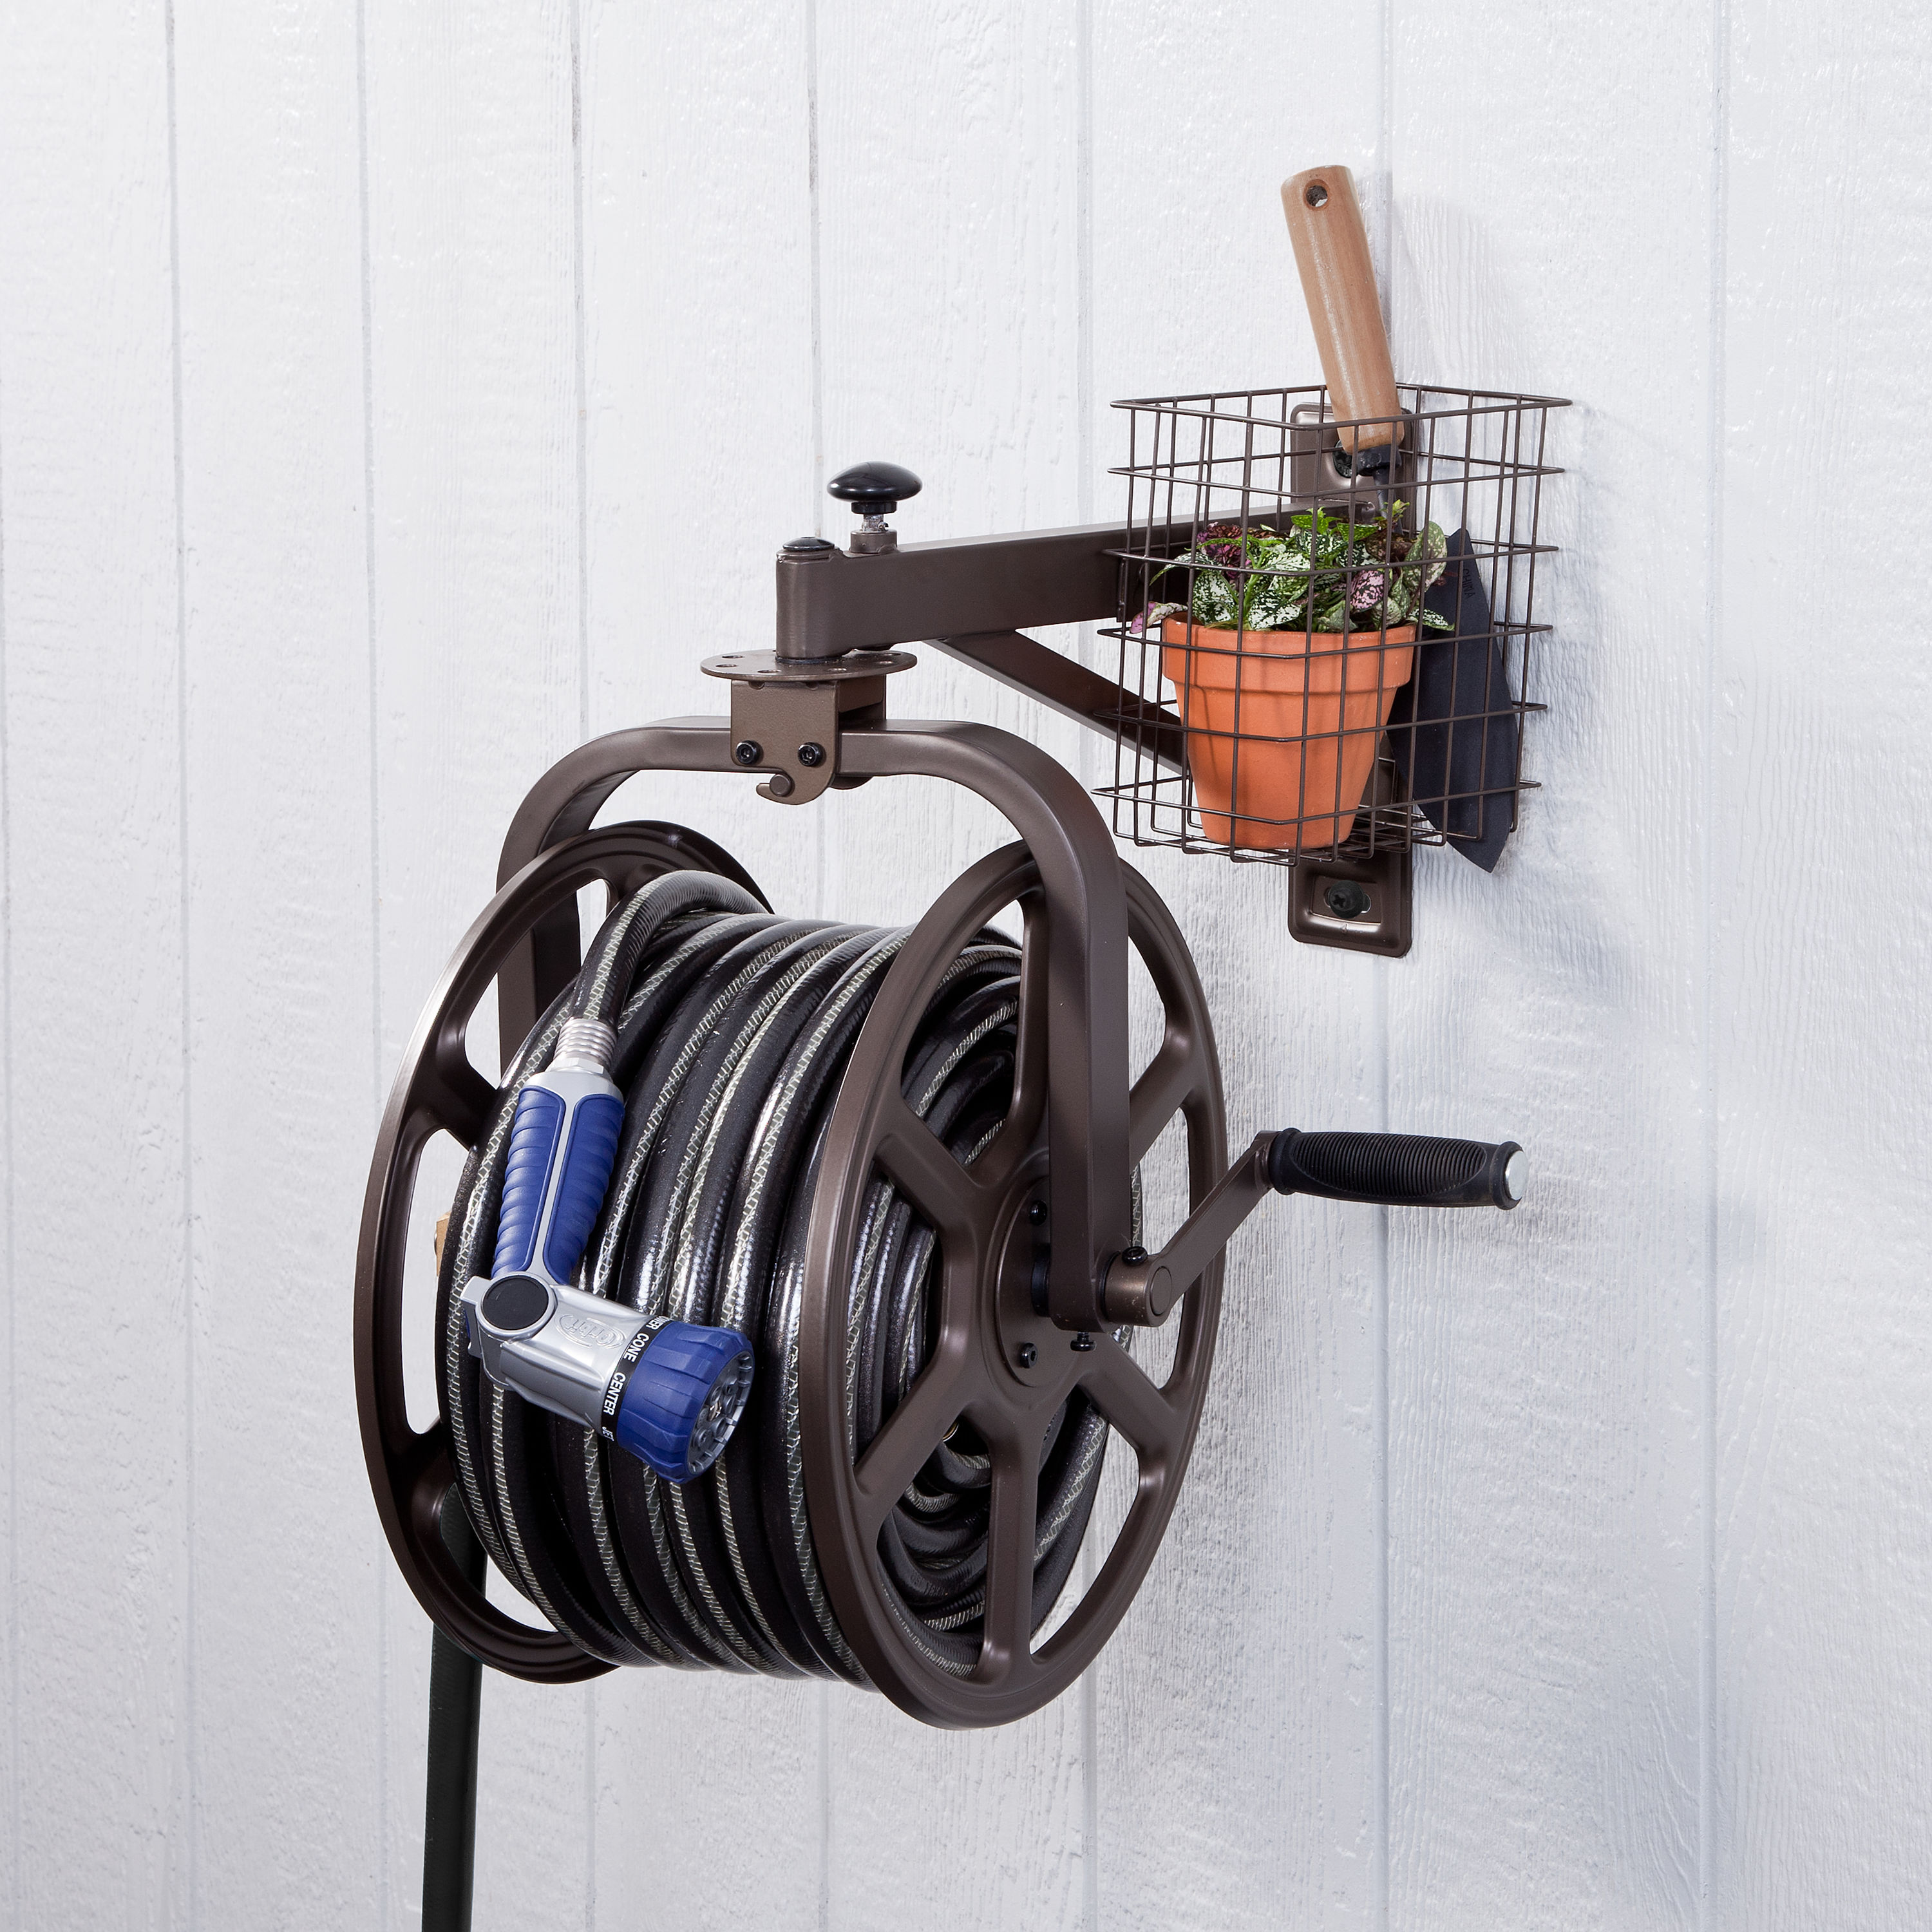 Utility wall mounted metal hose reel for Gardens & Irrigation 